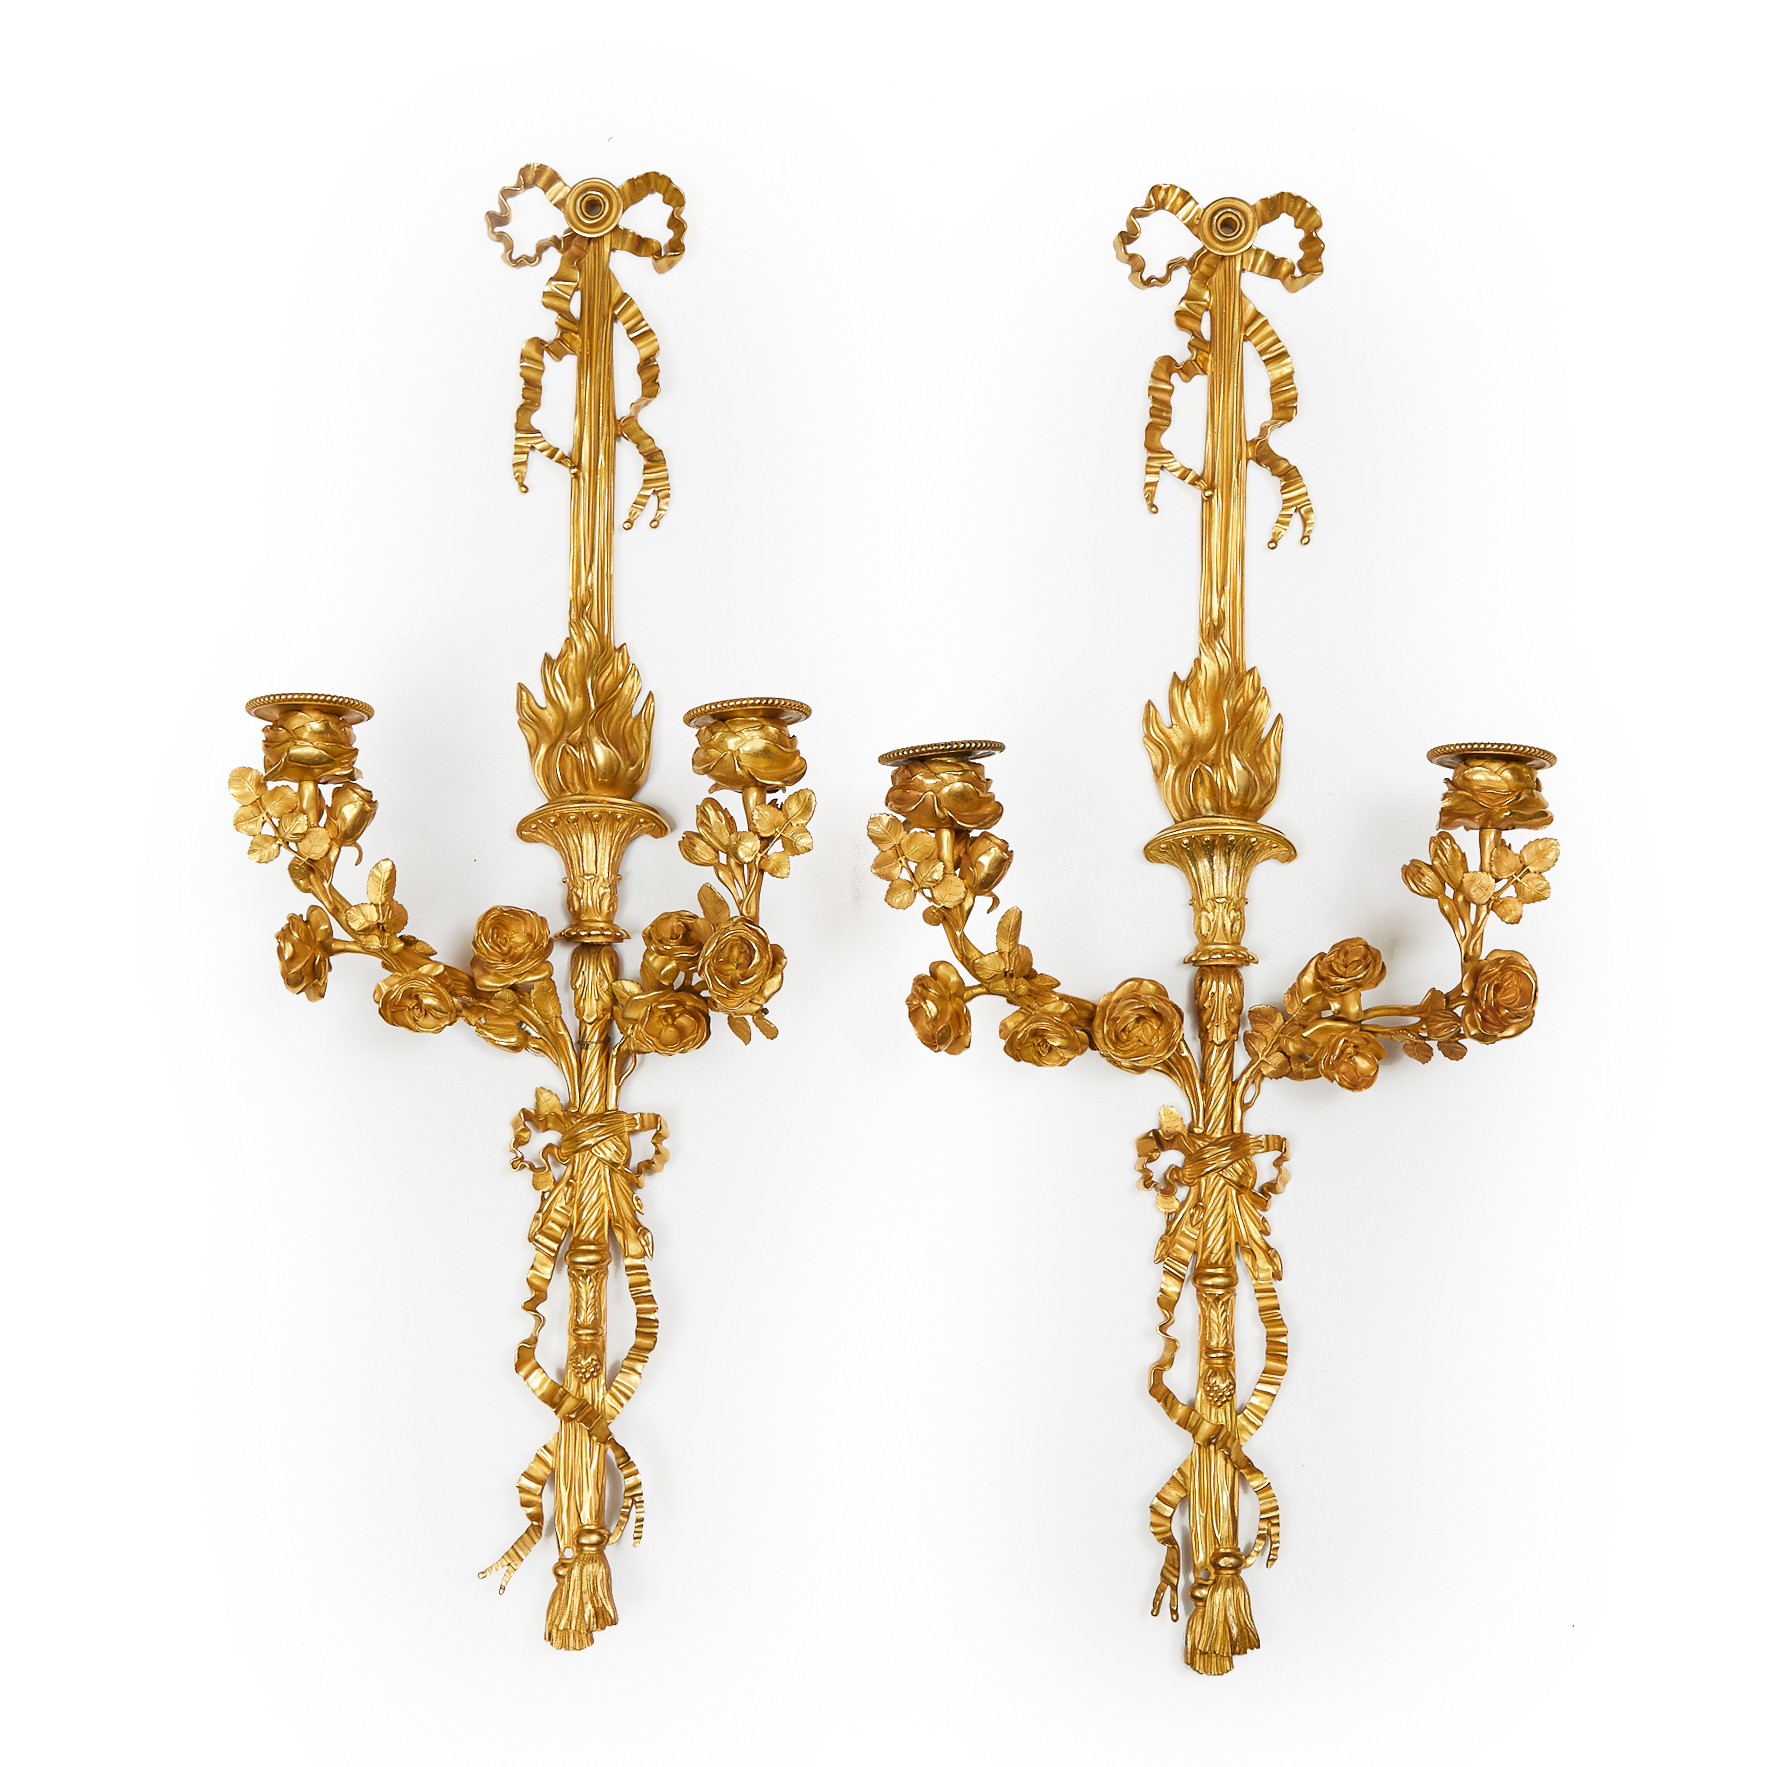 Large Pair of Louis XVI Style Naturalistic Wall Sconces, mid 20th century